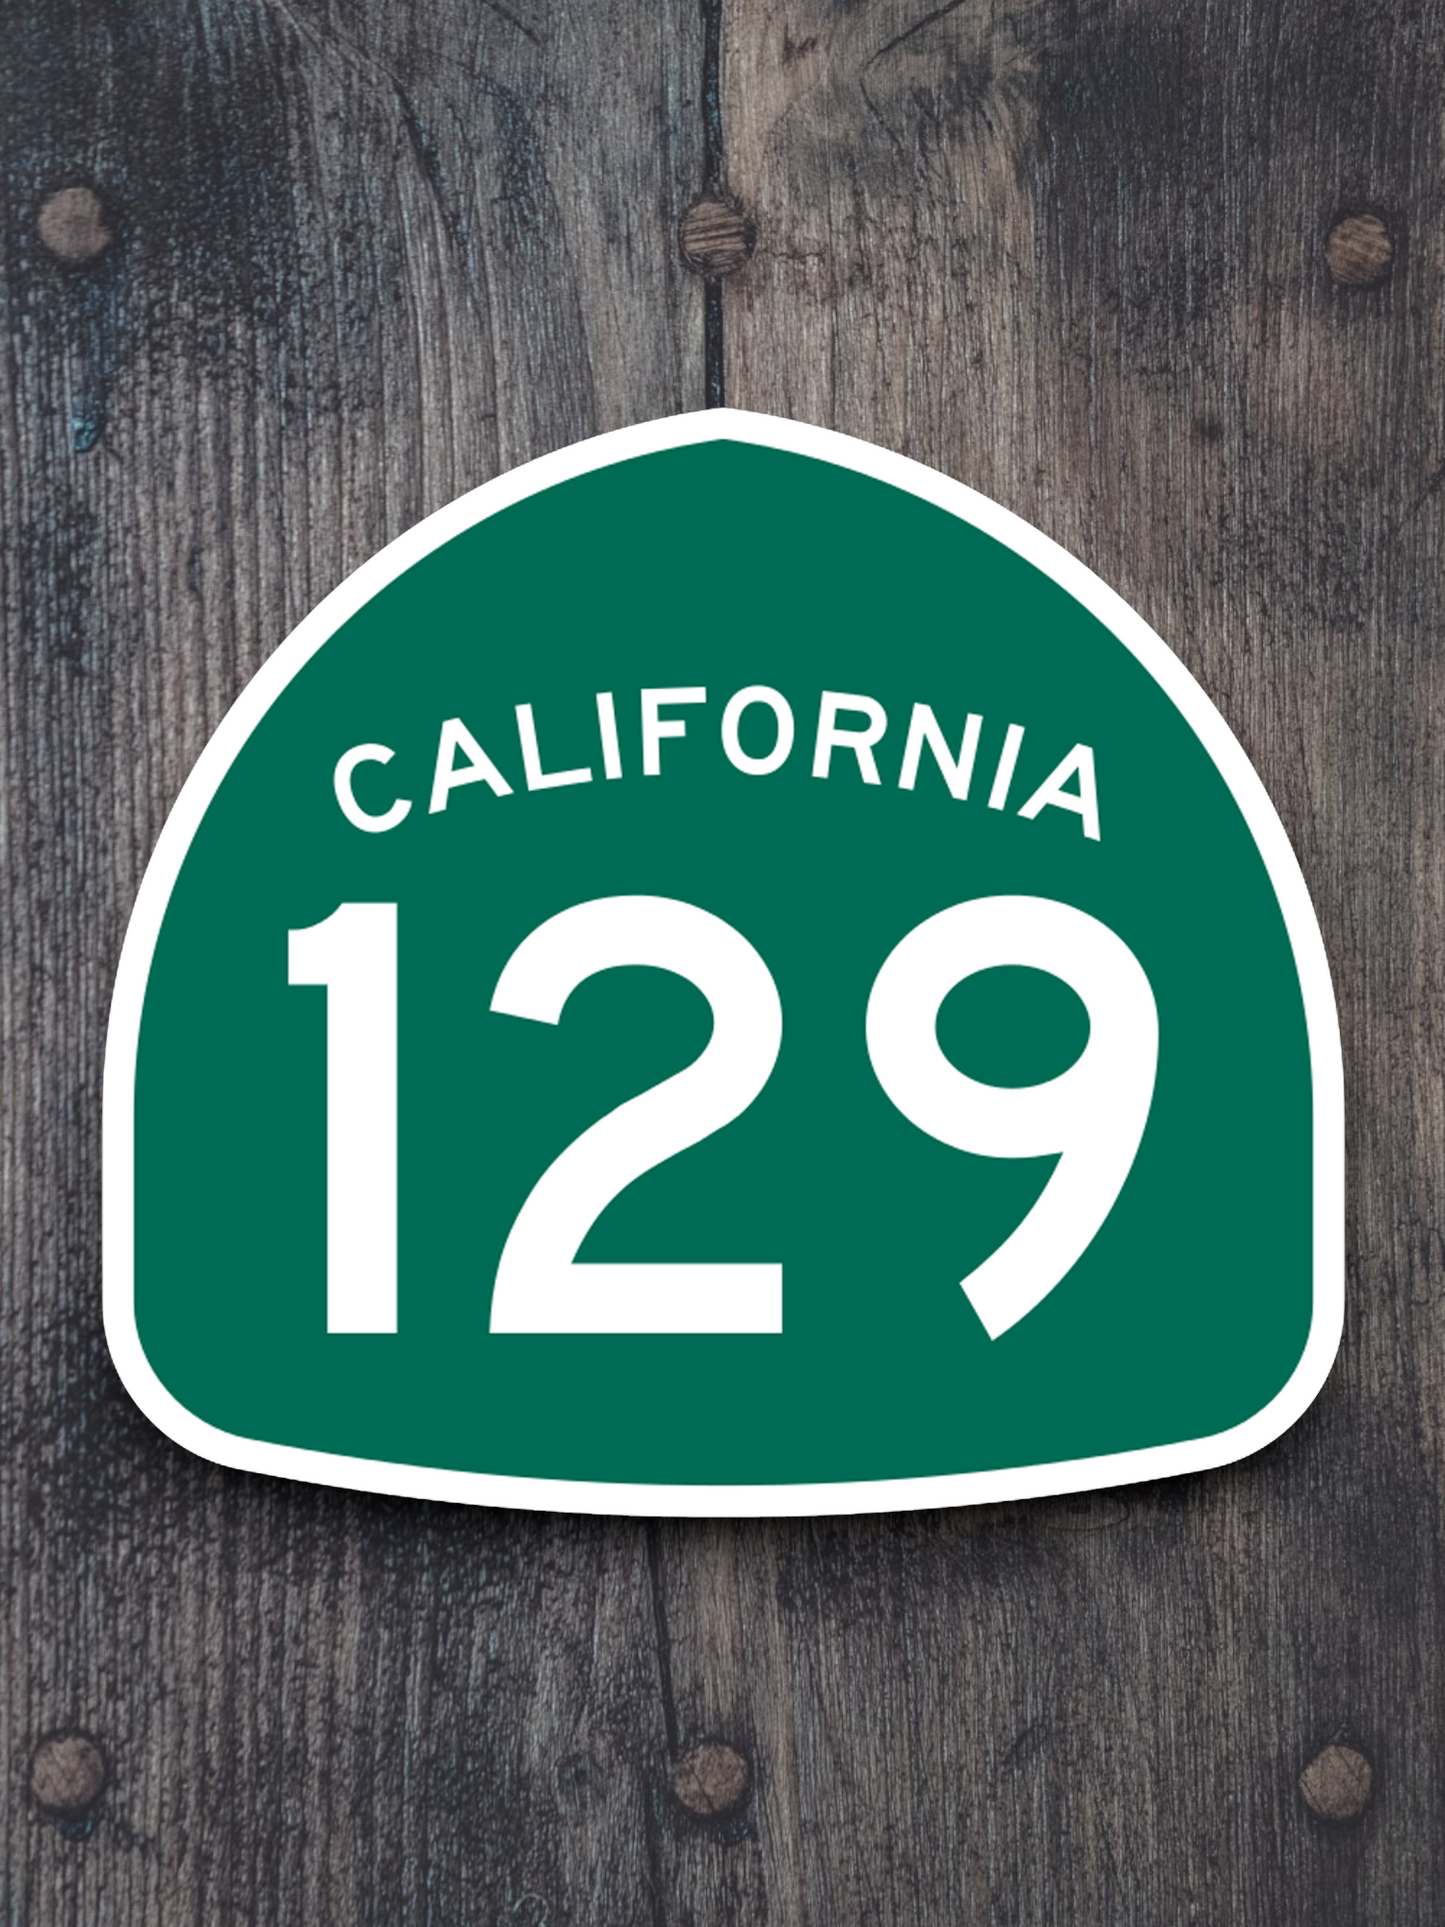 California State Route 129 Road Sign Sticker